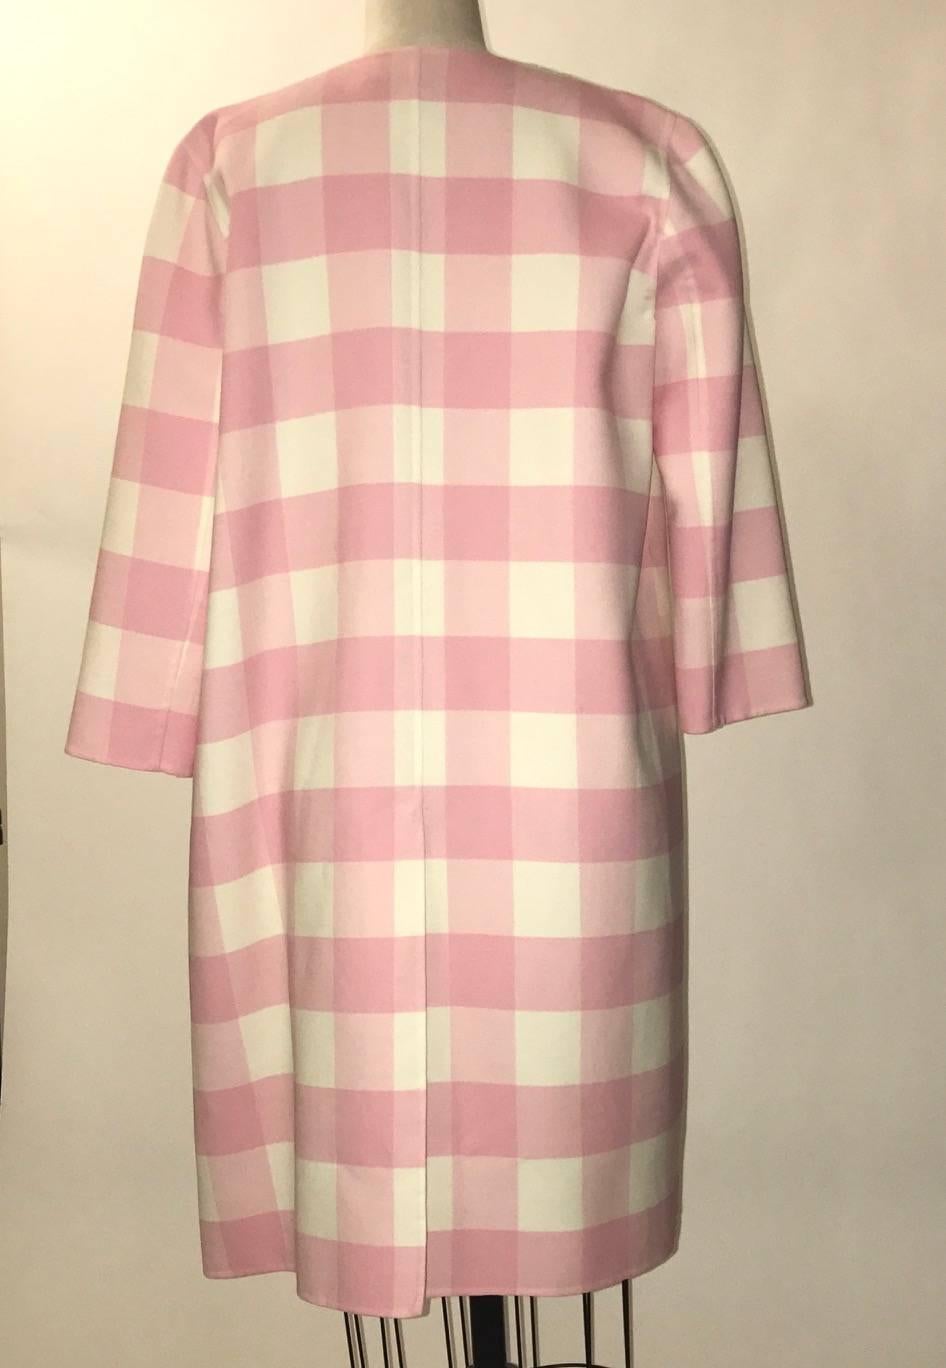 Oscar de la Renta Spring 2015 lightweight pink and white buffalo check open front coat with a relaxed silhouette. 3/4 sleeves, pockets at hip.

Seen in Look 1 of the runway collection.

98% virgin wool, 1% nylon, 1% elastane.

Made in Italy.

Size